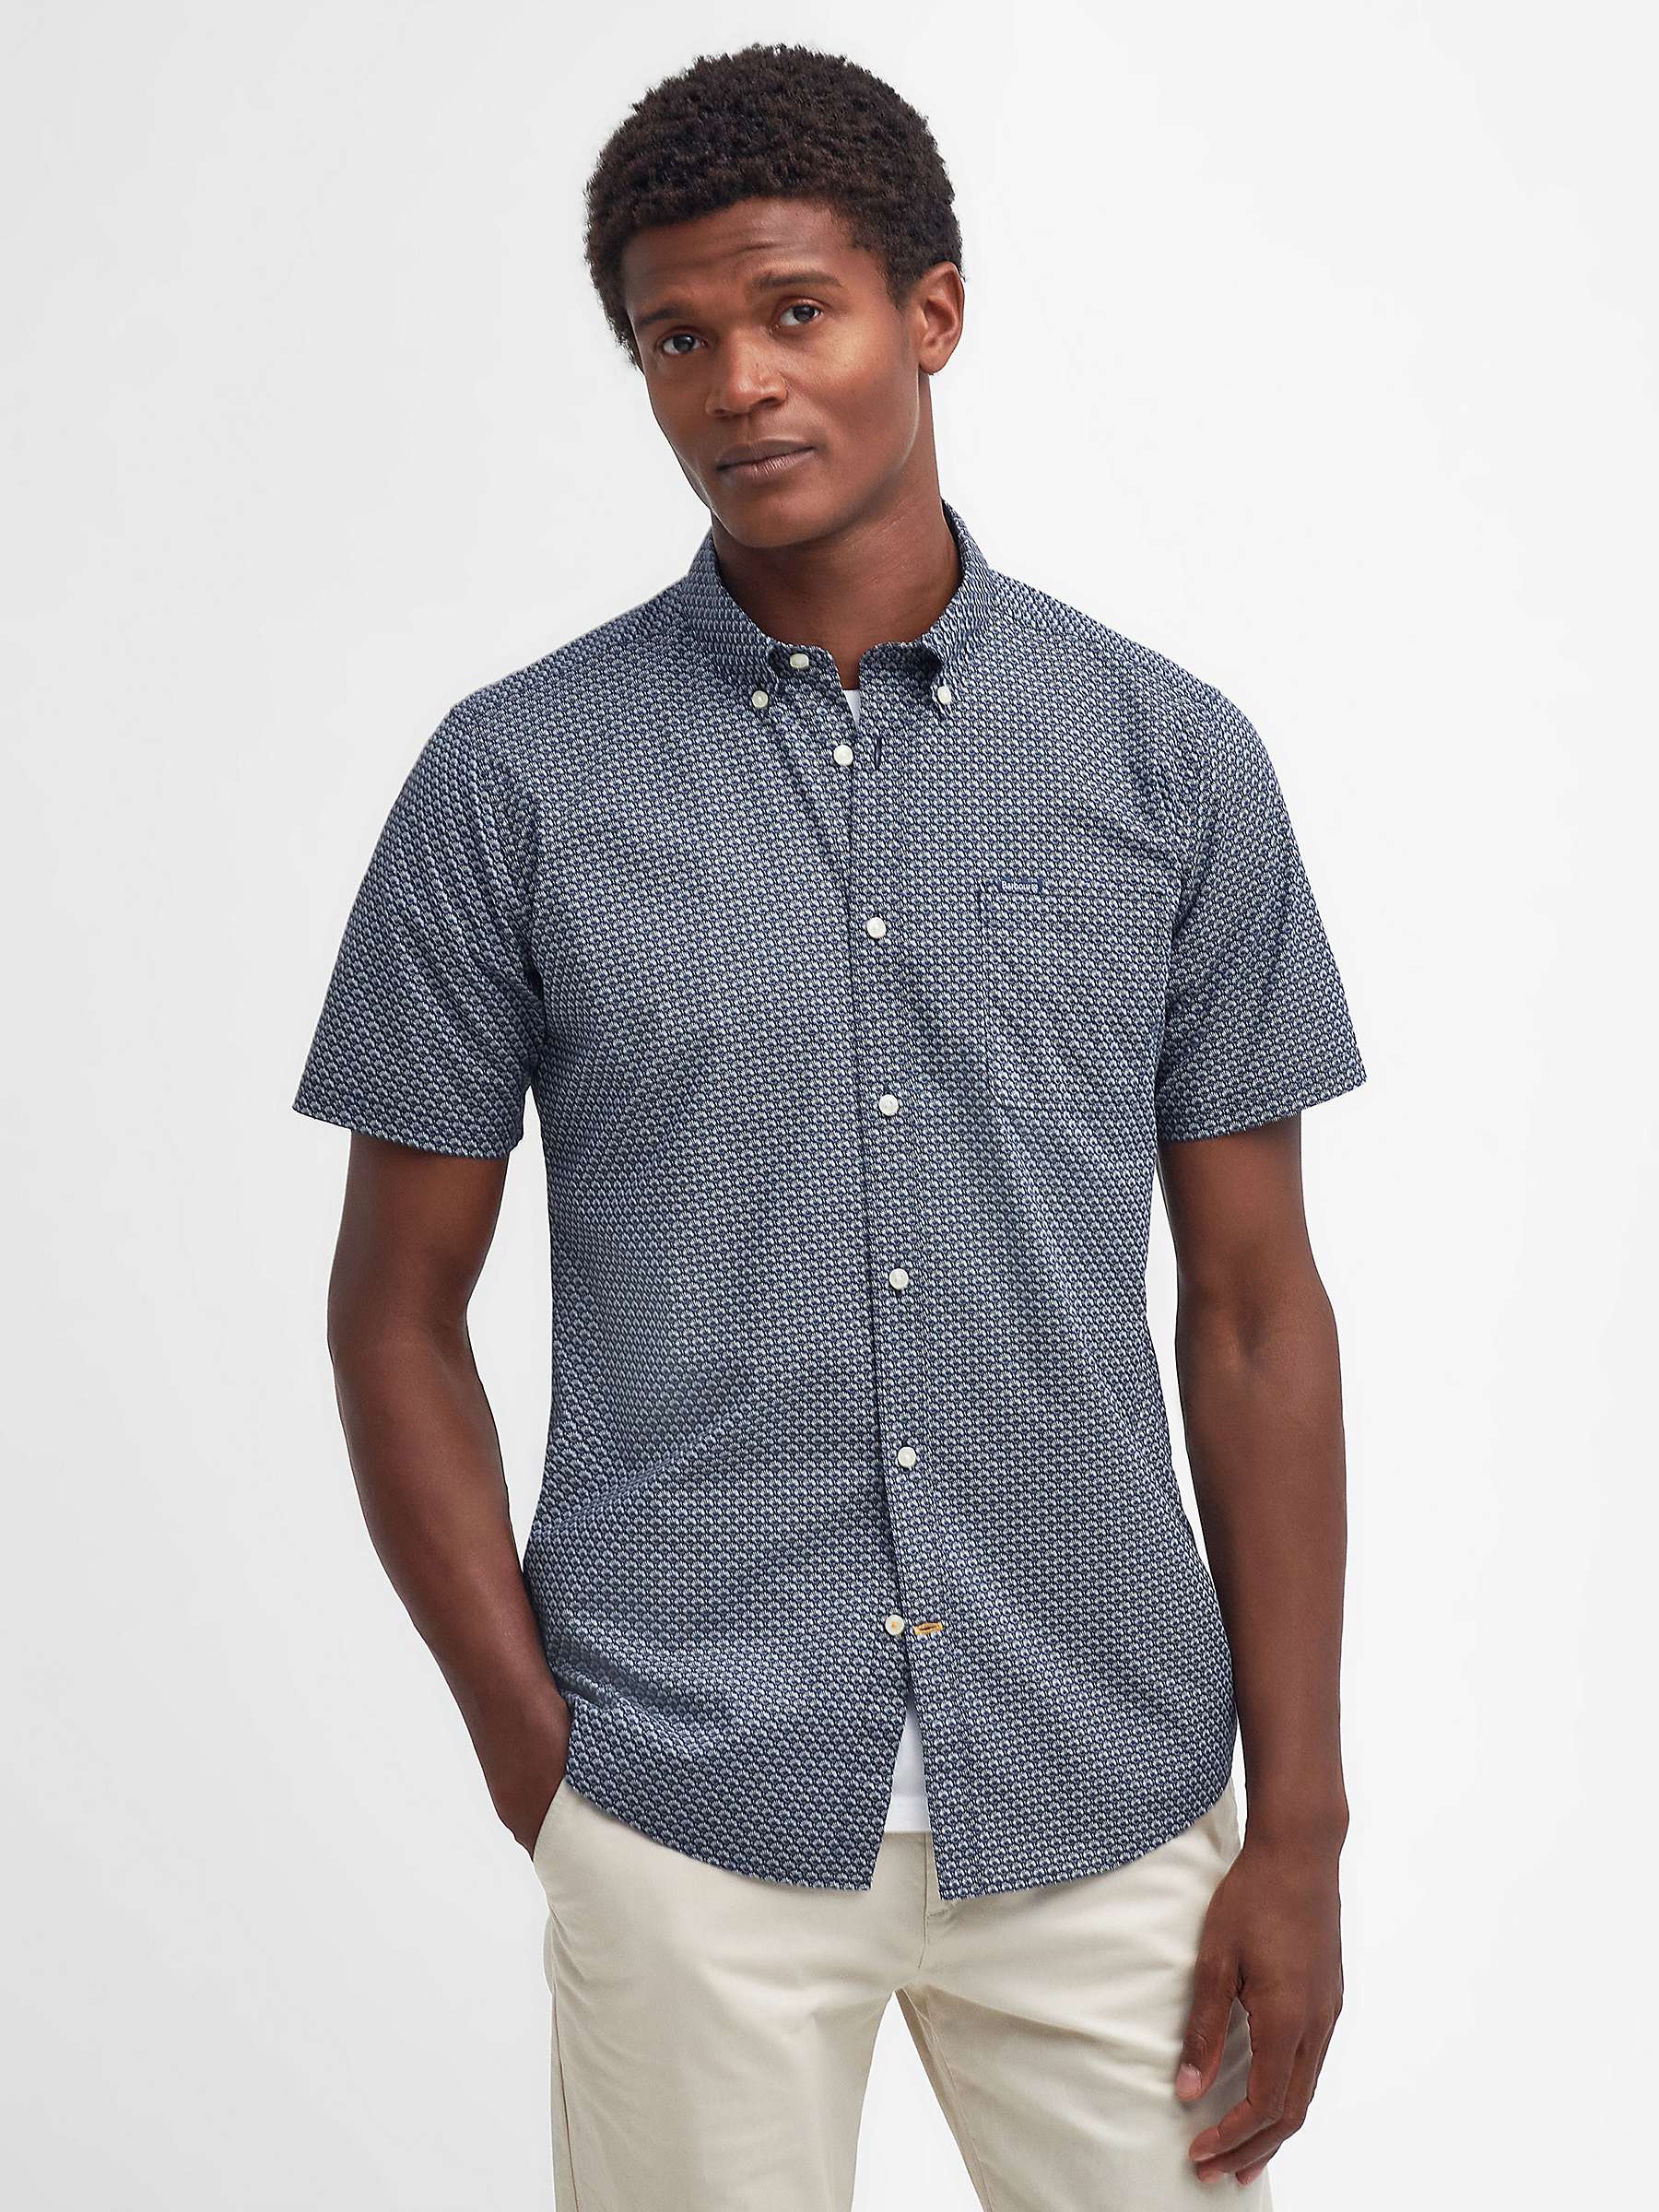 Buy Barbour Shell Cotton Short Sleeve Tailored Shirt, Navy Online at johnlewis.com